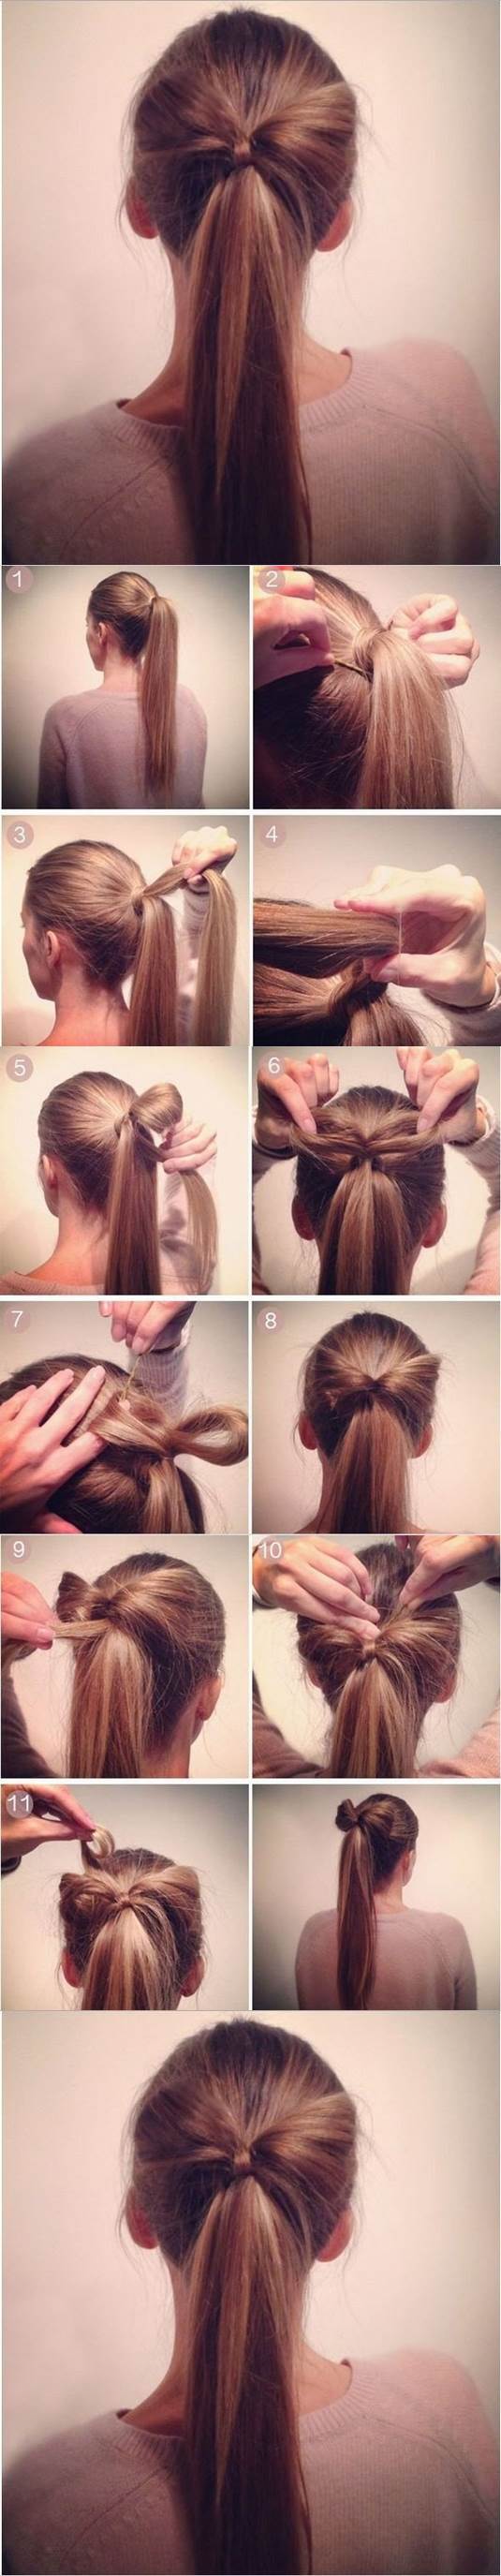 DIY Bow Ponytail Hairstyle 2